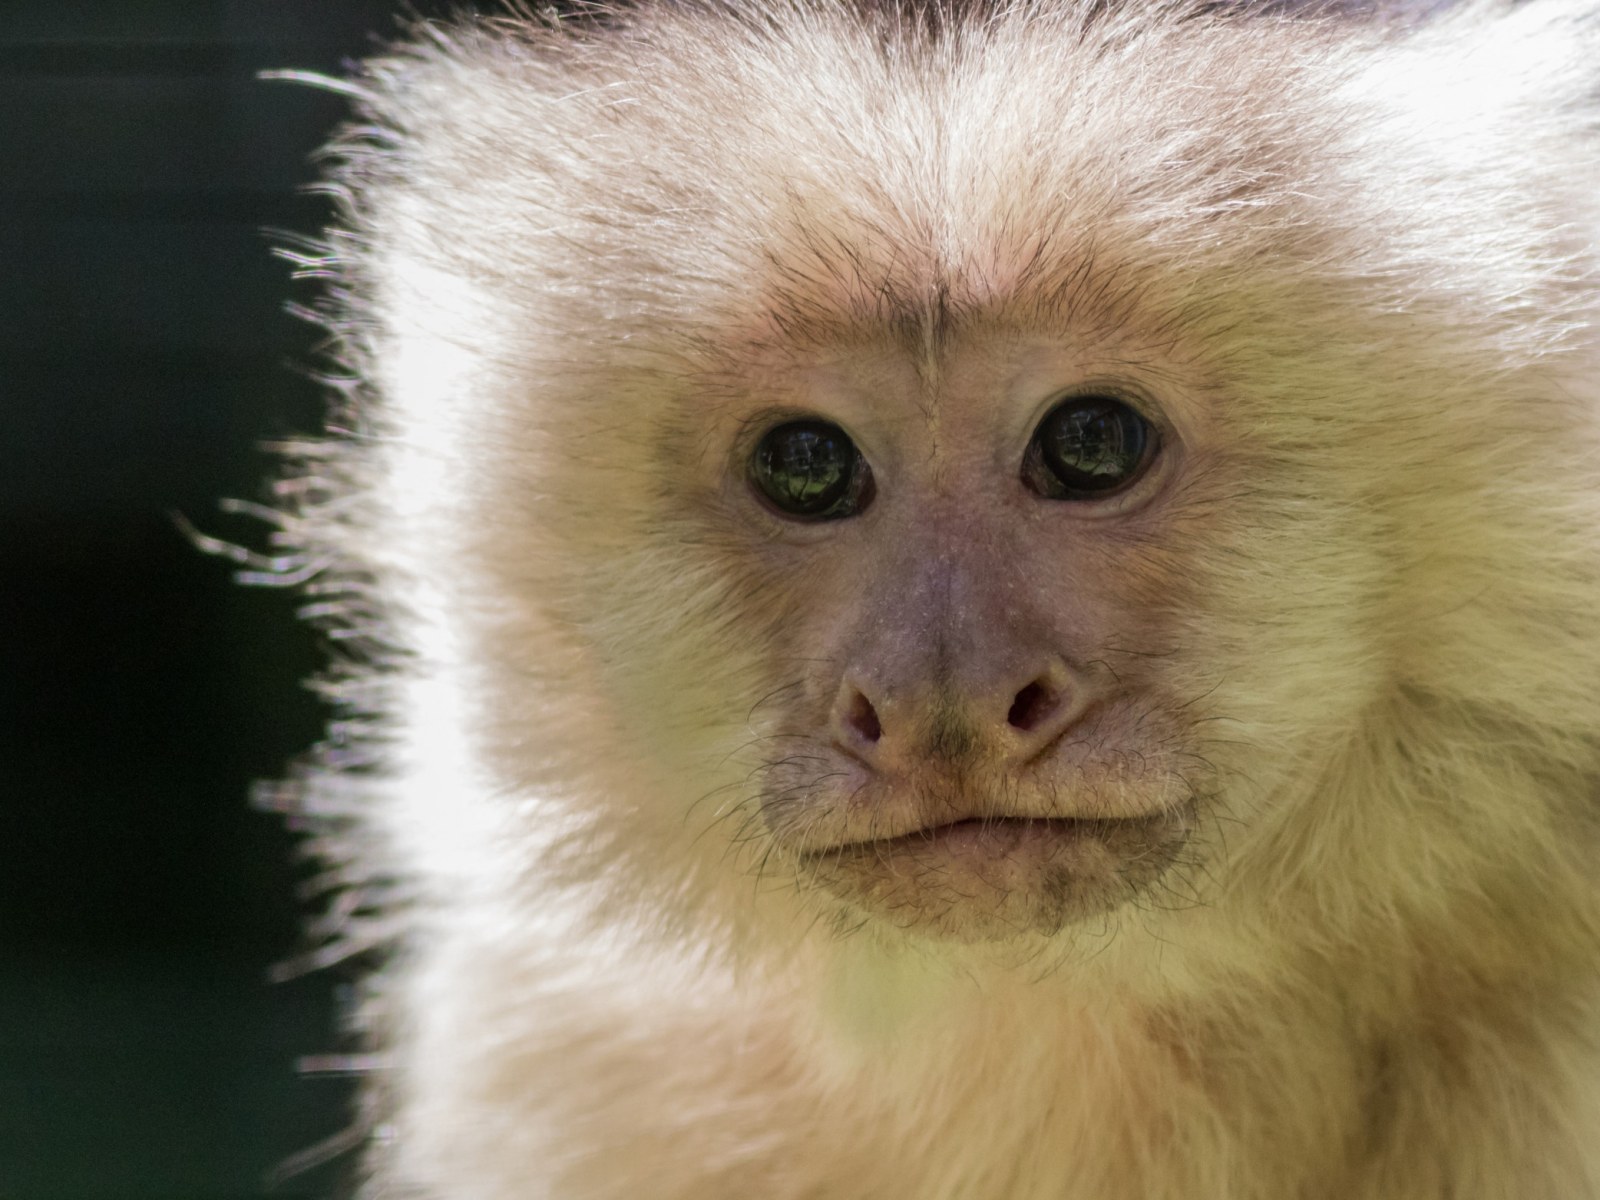 The Monkey Profile Picture Trend On TikTok: What You Need To Know!